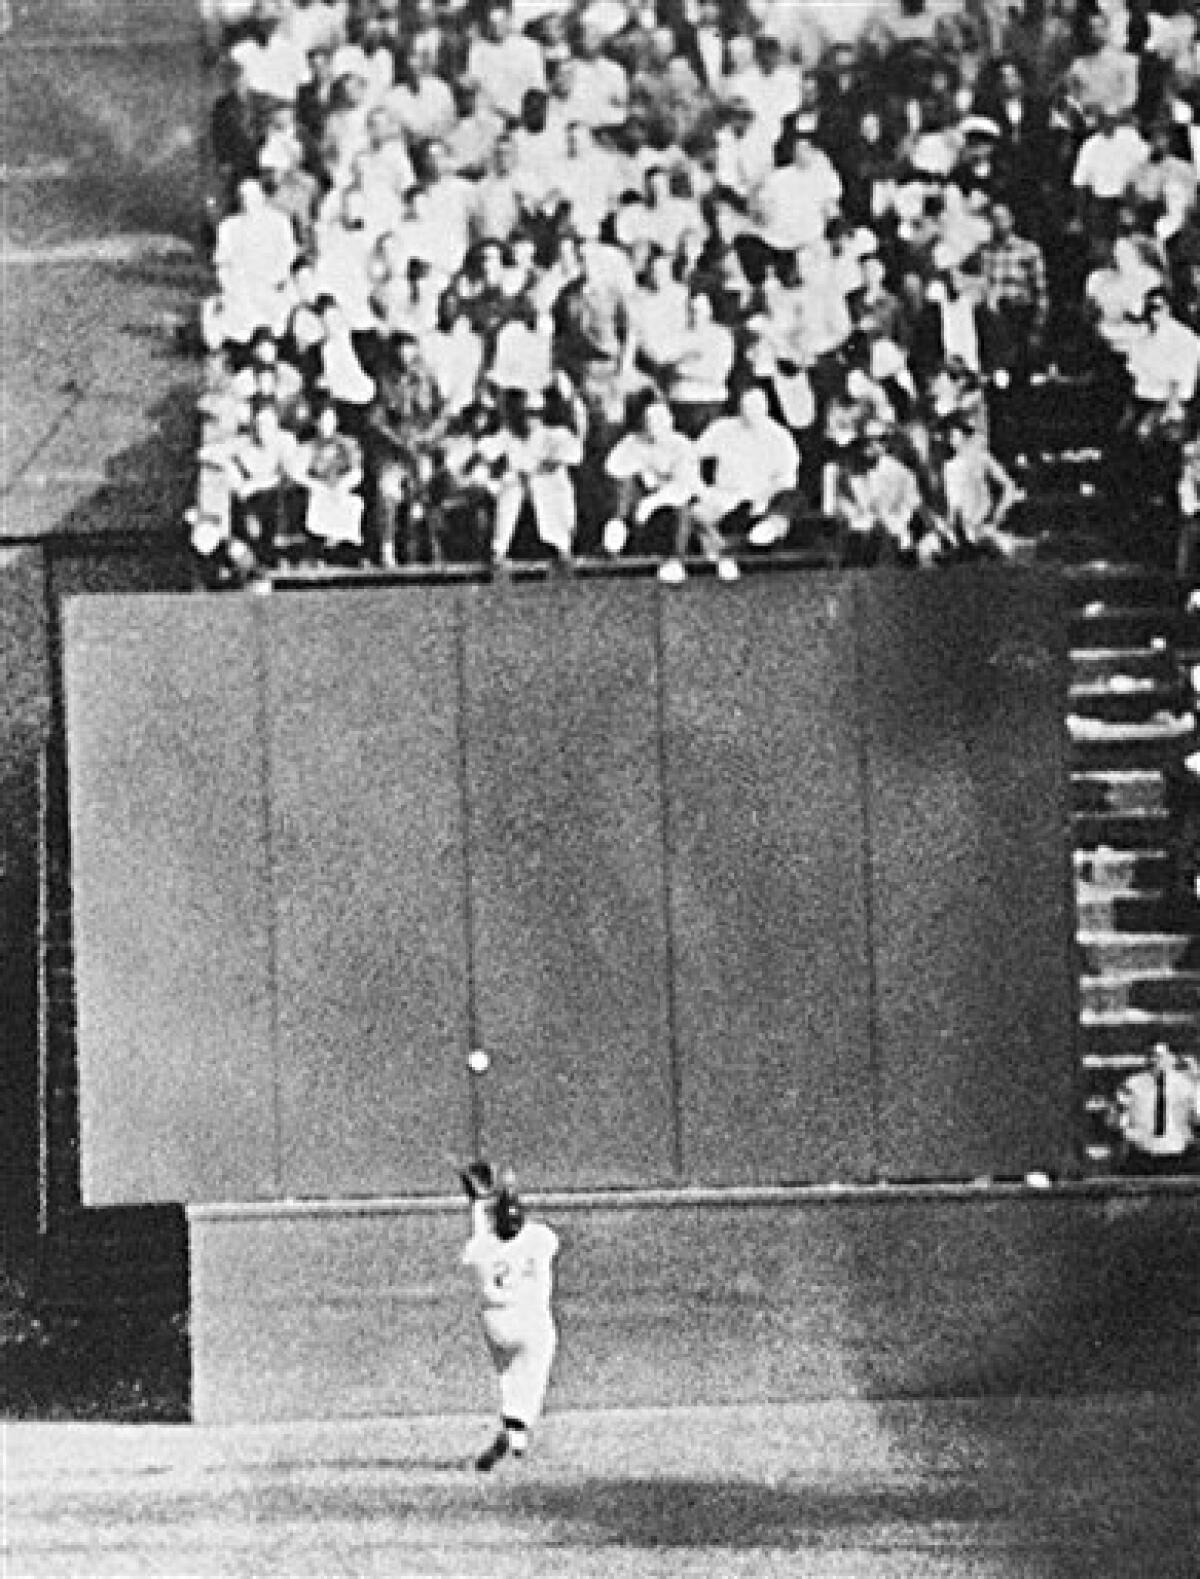 FILE- In this Sept. 29, 1954 file photo, New York Giants center fielder Willie Mays, running at top speed with his back to the plate, gets under a 450-foot blast off the bat of Cleveland Indians first baseman Vic Wertz to pull the ball down in front of the bleachers wall in the eighth inning of Game 1 of the World Series at the Polo Grounds in New York. In making the miraculous catch with two runners on base, Mays came within a step of crashing into the wall. The Giants won 5-2.